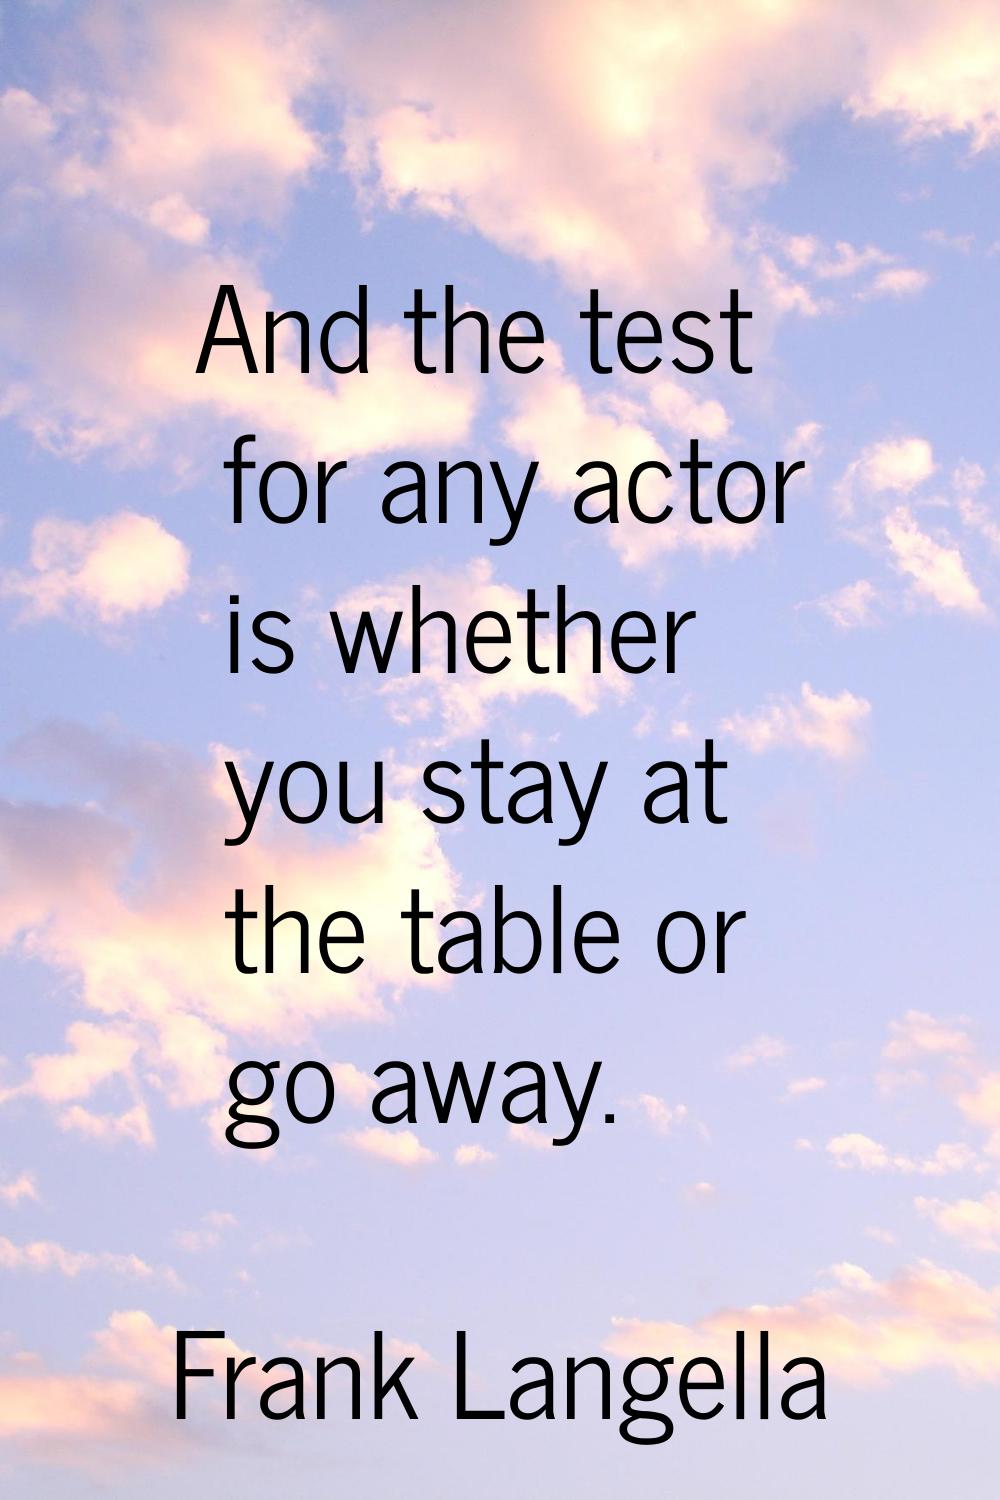 And the test for any actor is whether you stay at the table or go away.